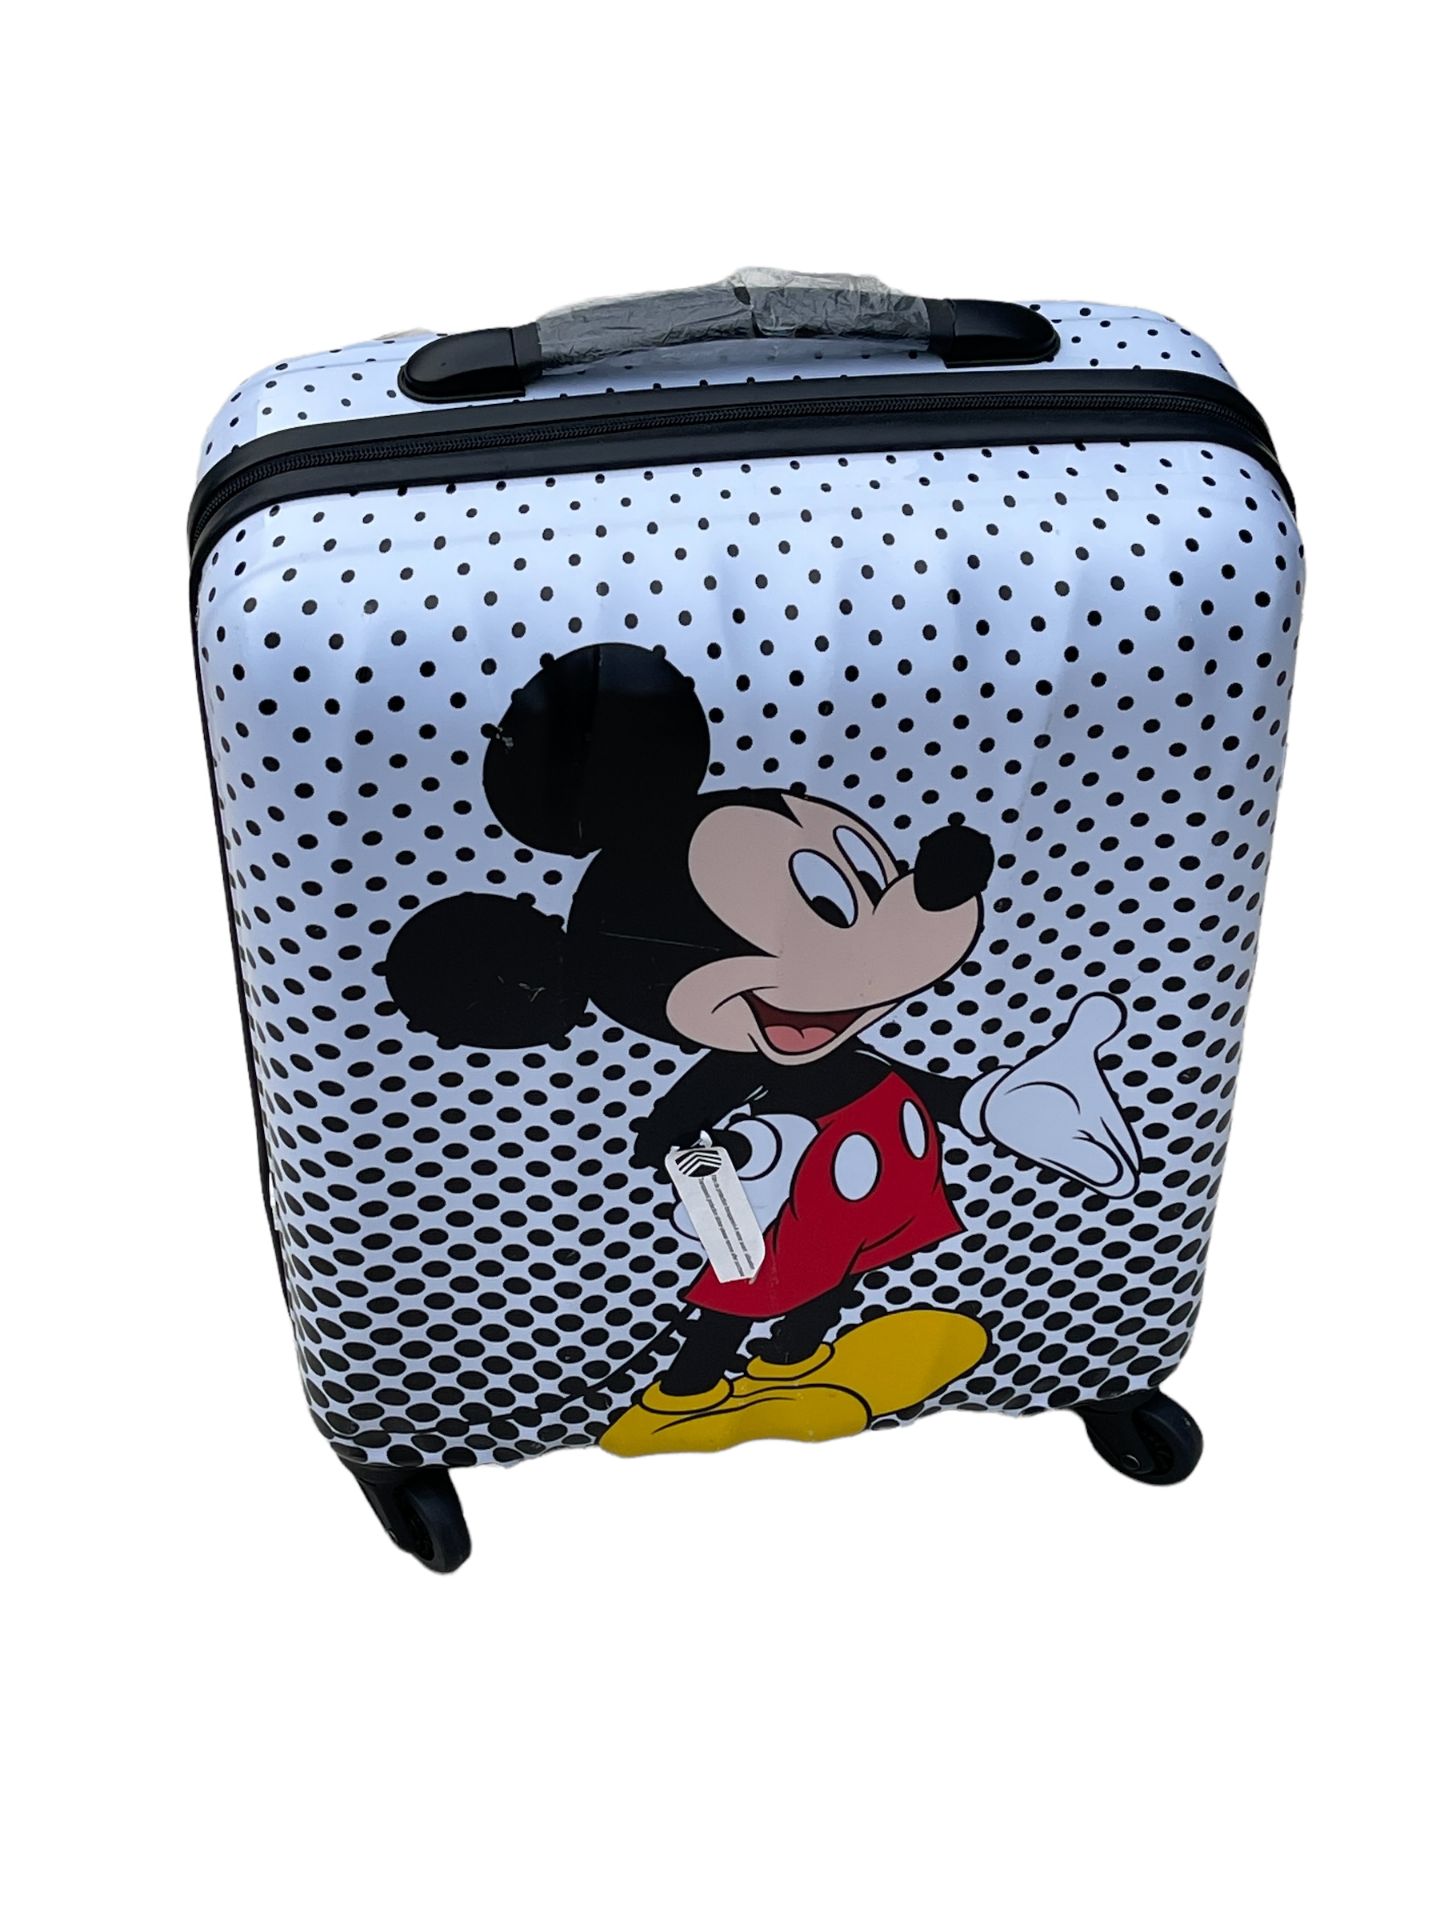 American Tourister Disney Mickey Mouse Polka Dot Carry-on Spinner Case 55cm - RRP £145 - Image 9 of 9